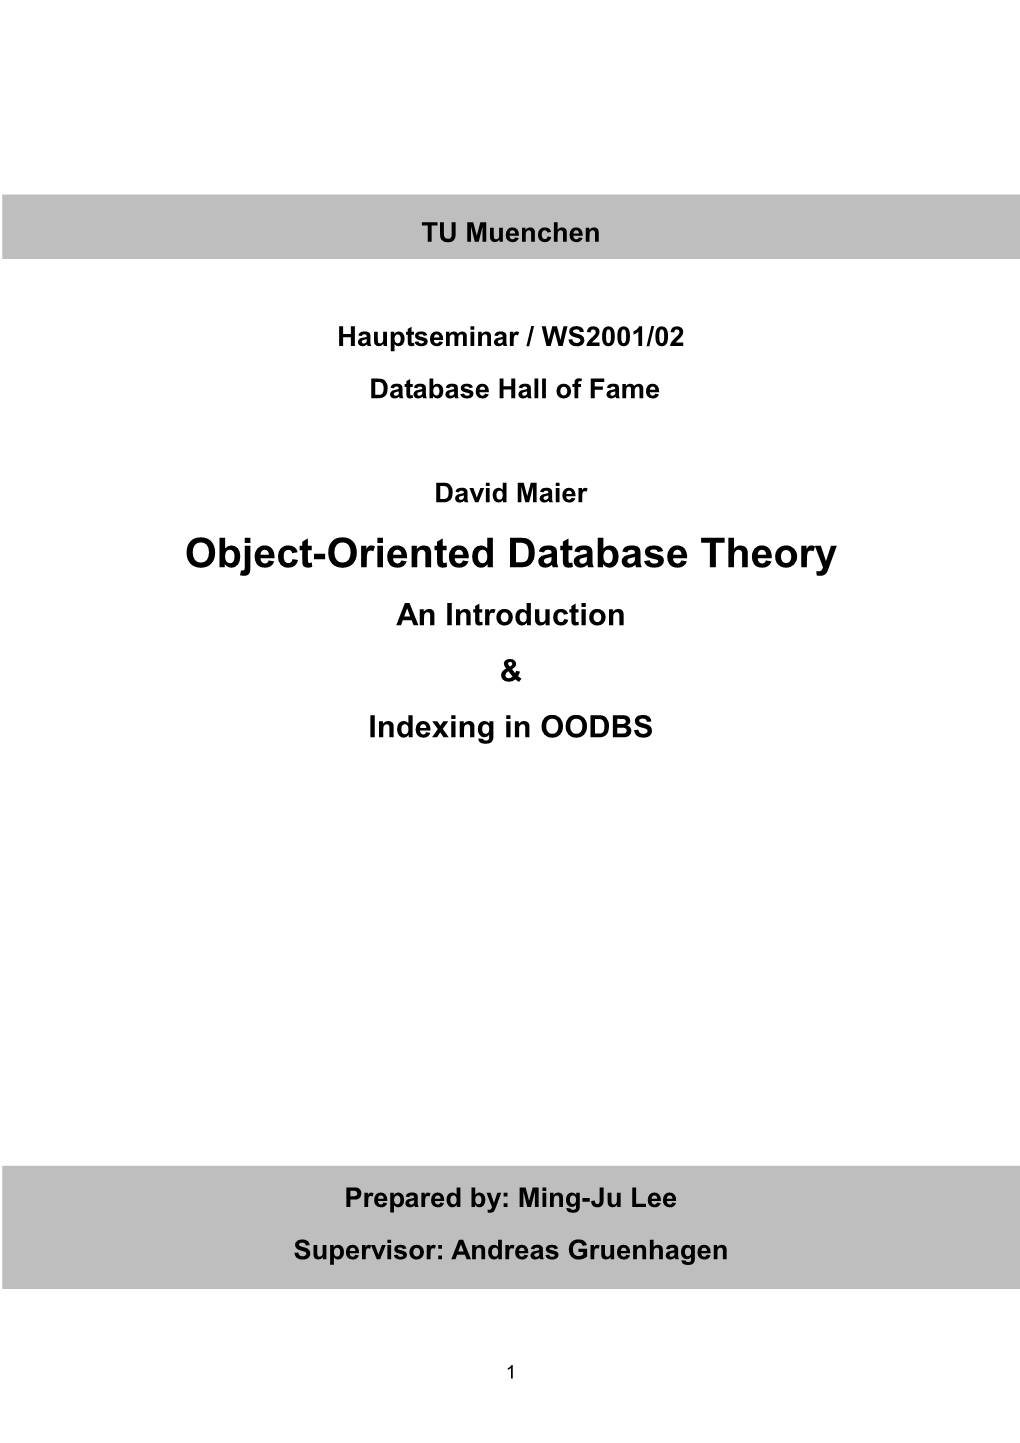 Object-Oriented Database Theory an Introduction & Indexing in OODBS